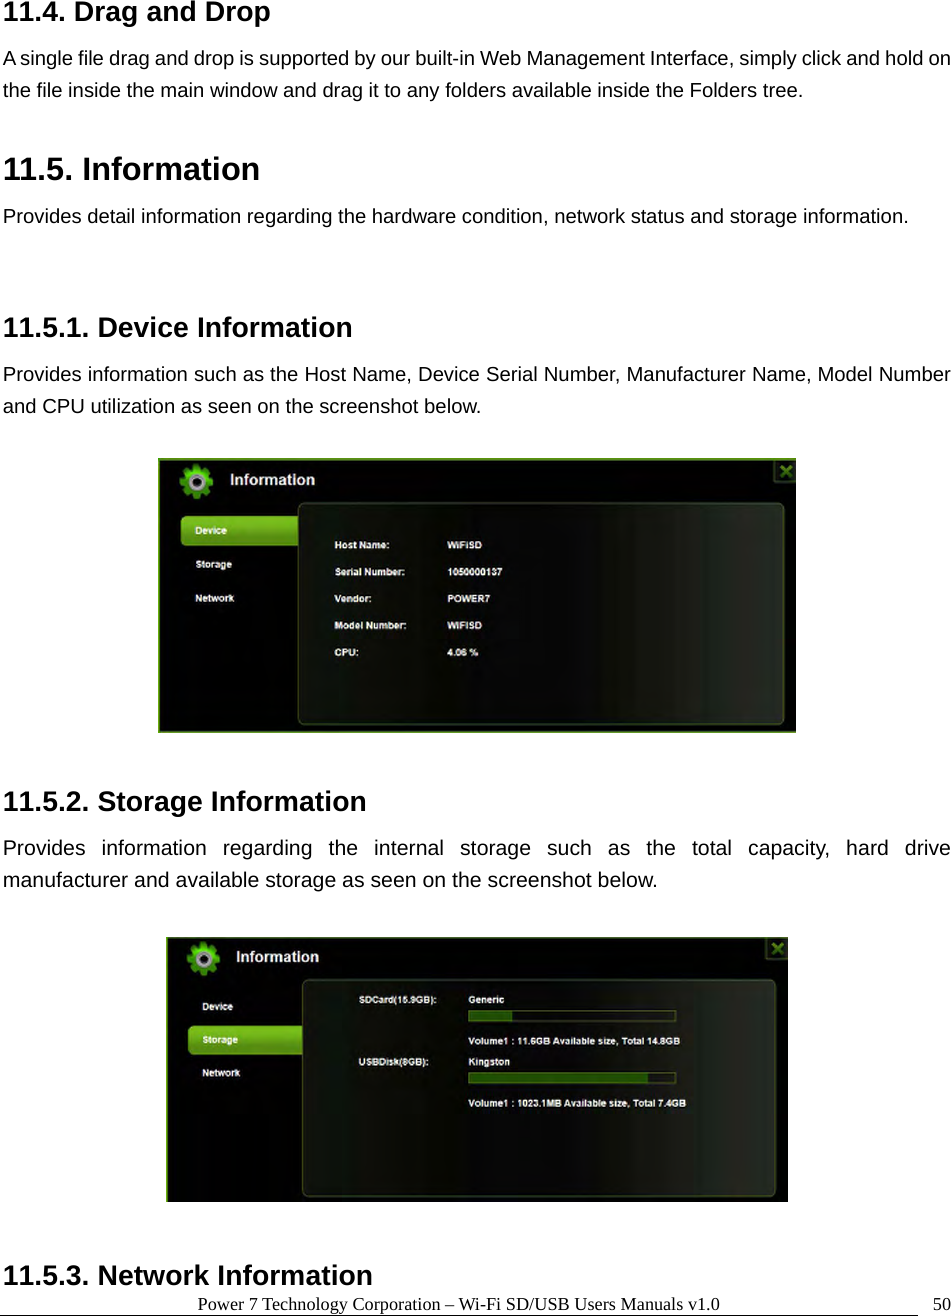 Power 7 Technology Corporation – Wi-Fi SD/USB Users Manuals v1.0  5011.4. Drag and Drop A single file drag and drop is supported by our built-in Web Management Interface, simply click and hold on the file inside the main window and drag it to any folders available inside the Folders tree.    11.5. Information Provides detail information regarding the hardware condition, network status and storage information.  11.5.1. Device Information Provides information such as the Host Name, Device Serial Number, Manufacturer Name, Model Number and CPU utilization as seen on the screenshot below.      11.5.2. Storage Information Provides information regarding the internal storage such as the total capacity, hard drive manufacturer and available storage as seen on the screenshot below.    11.5.3. Network Information 